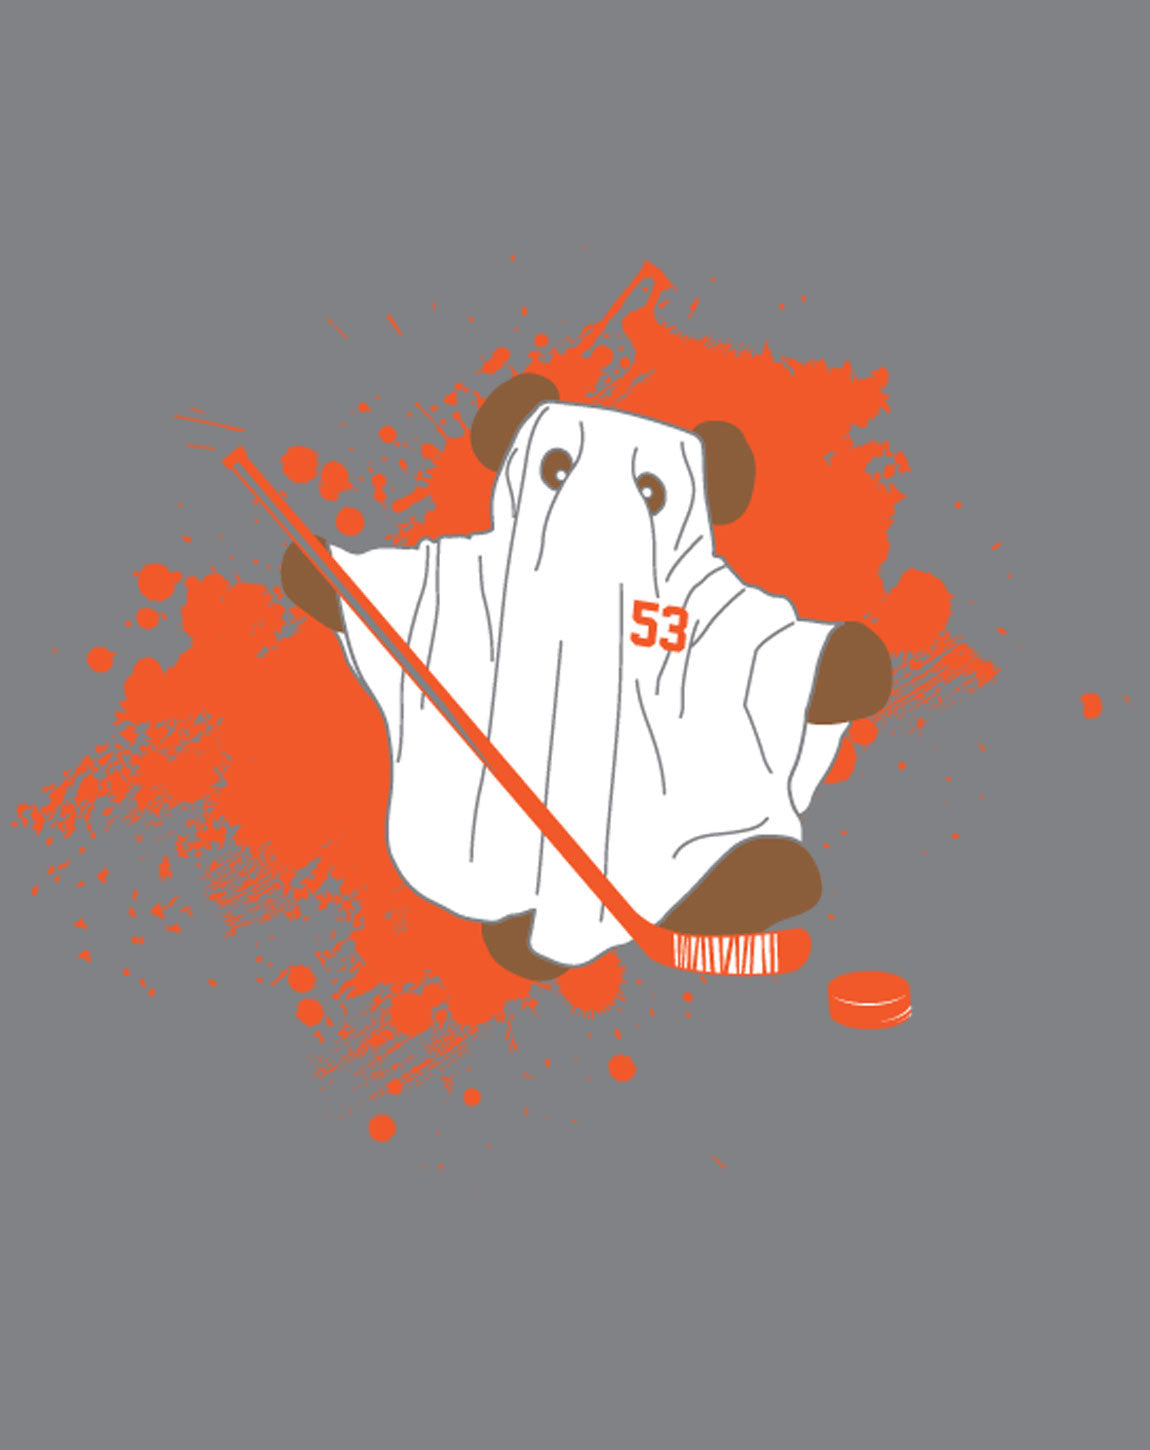 ghost flyers shirt